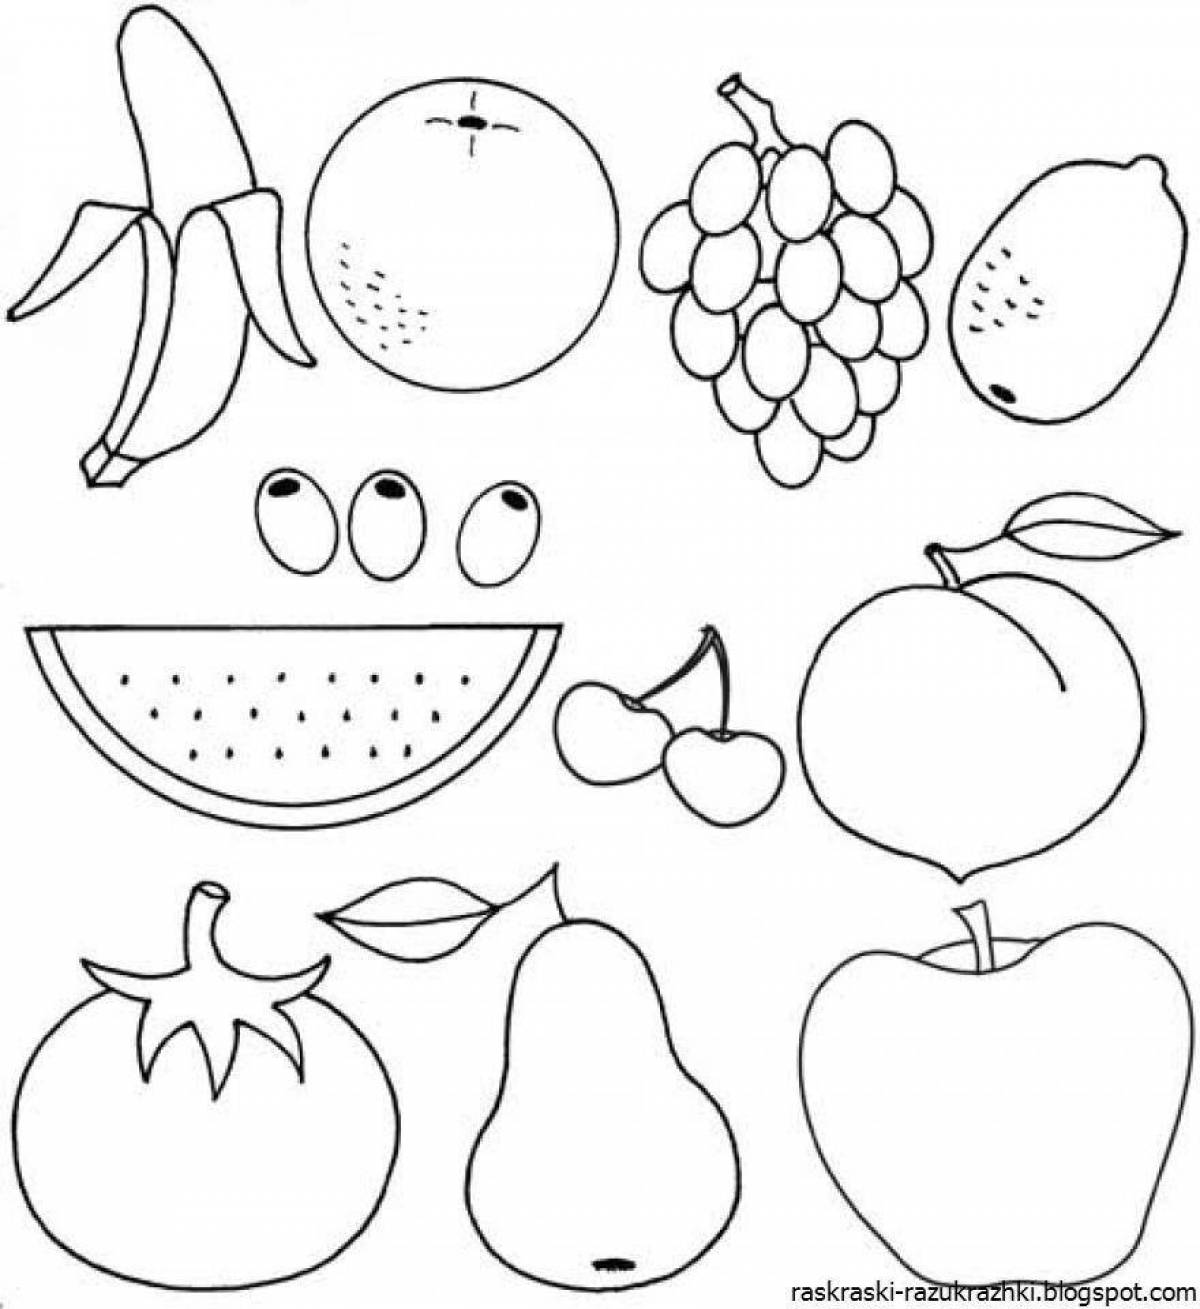 Fantastic vegetable and fruit coloring book for kids